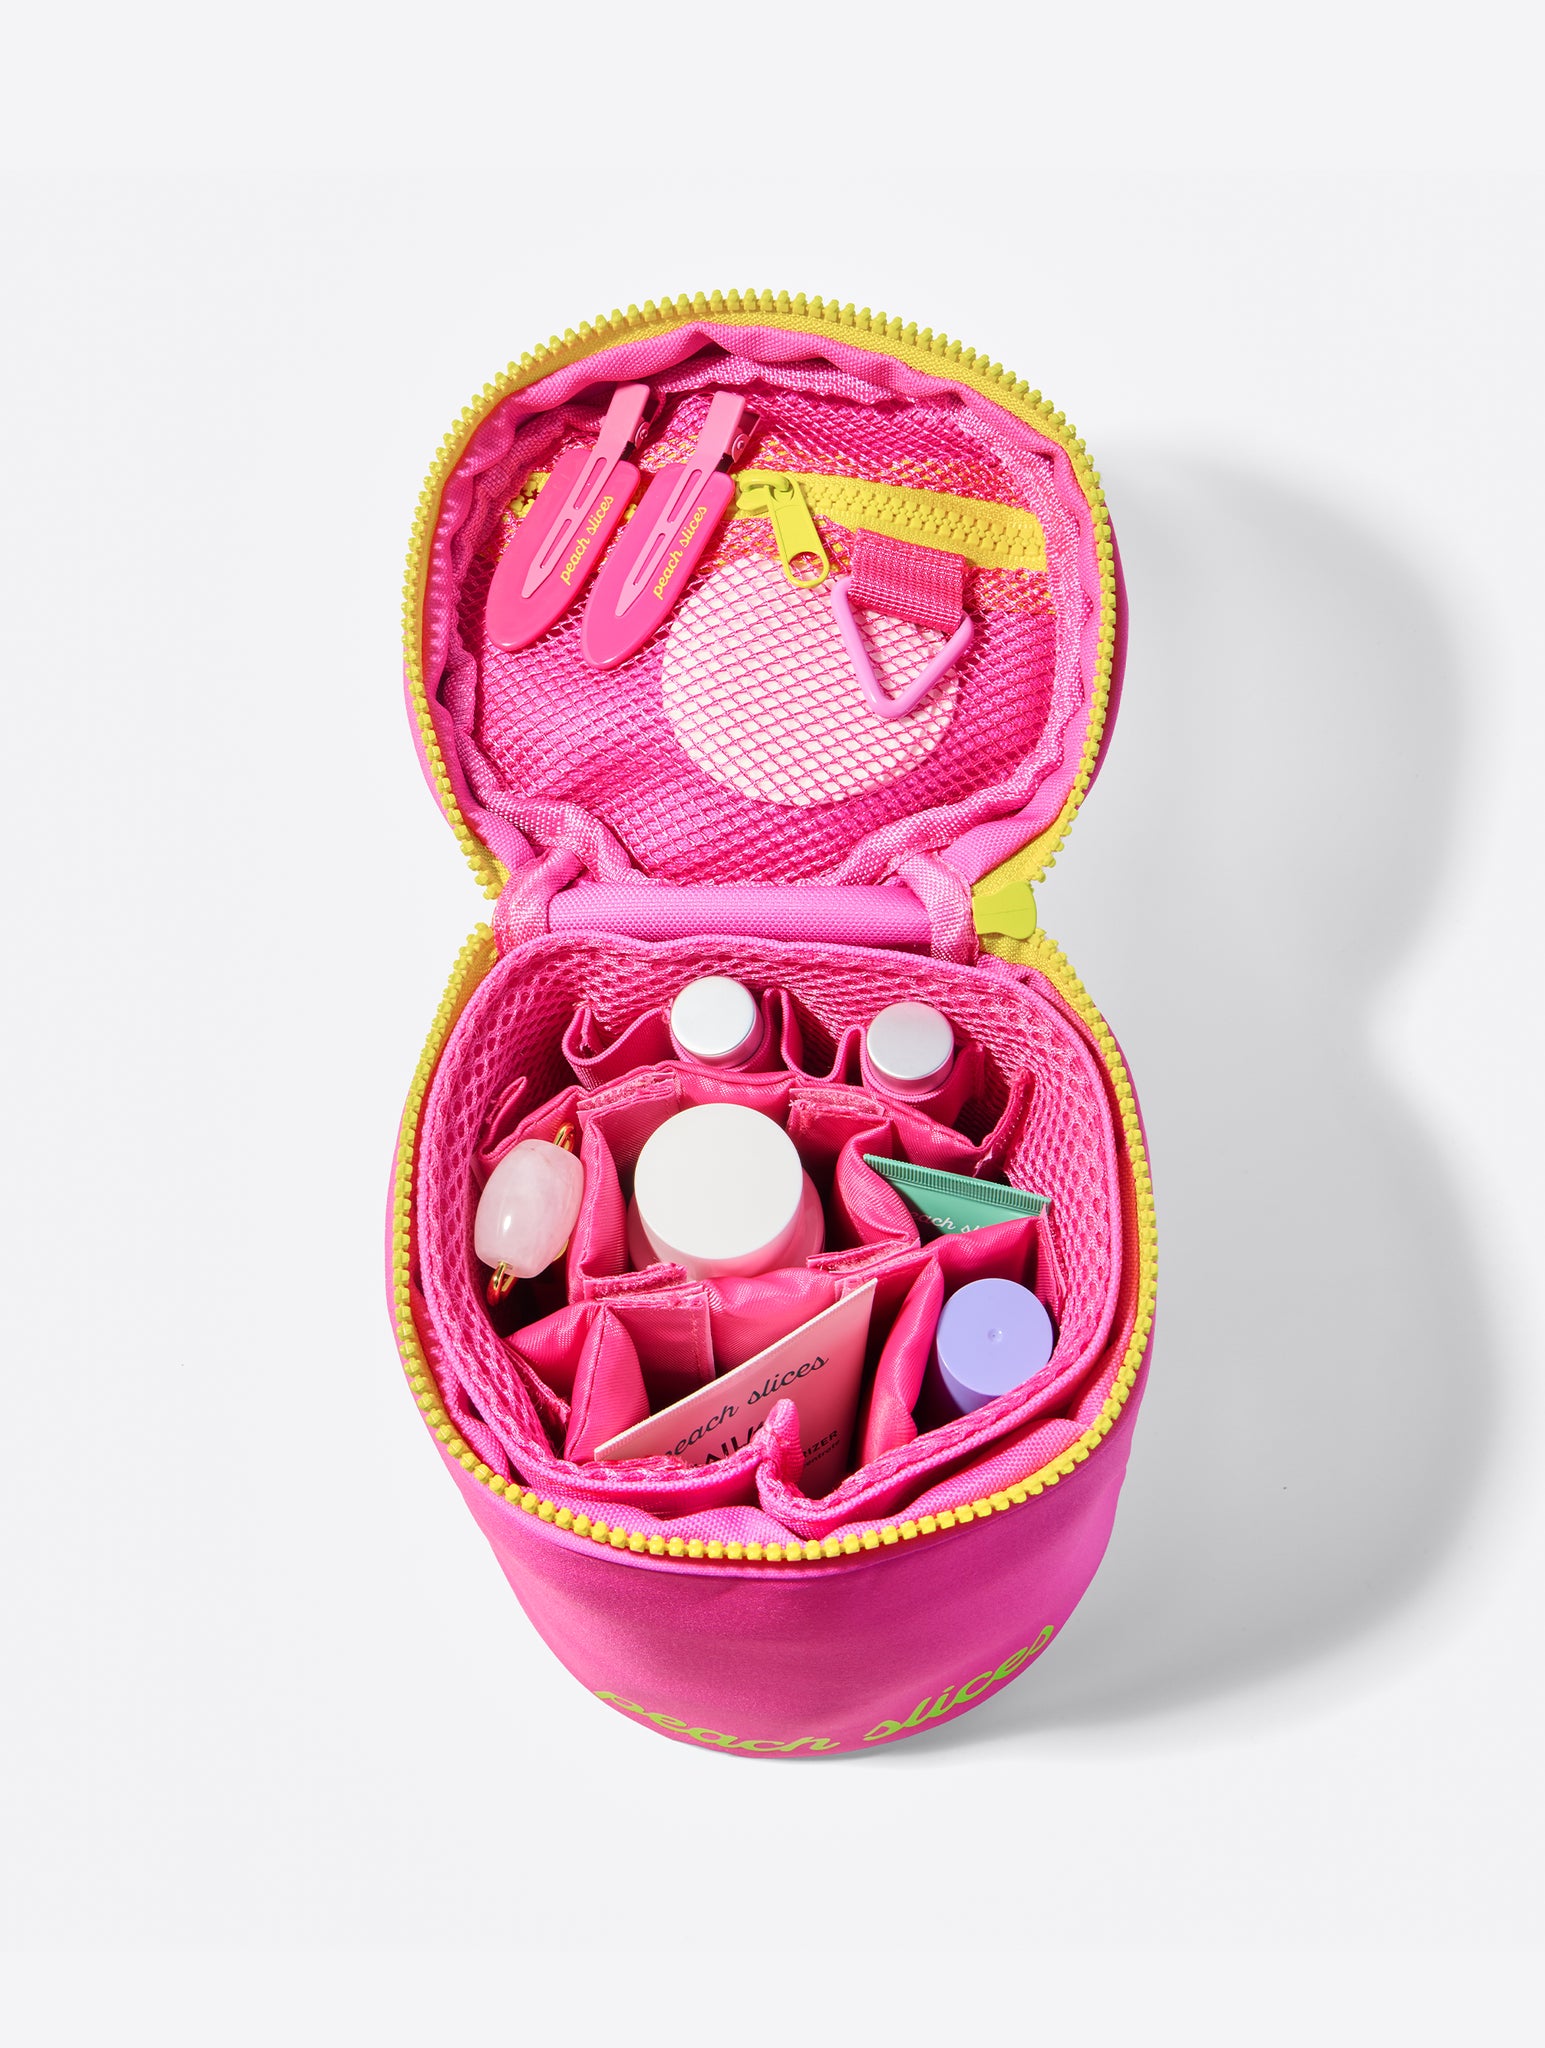 Open pink Peach Slices standing makeup bag showing various compartments for makeup and skincare products